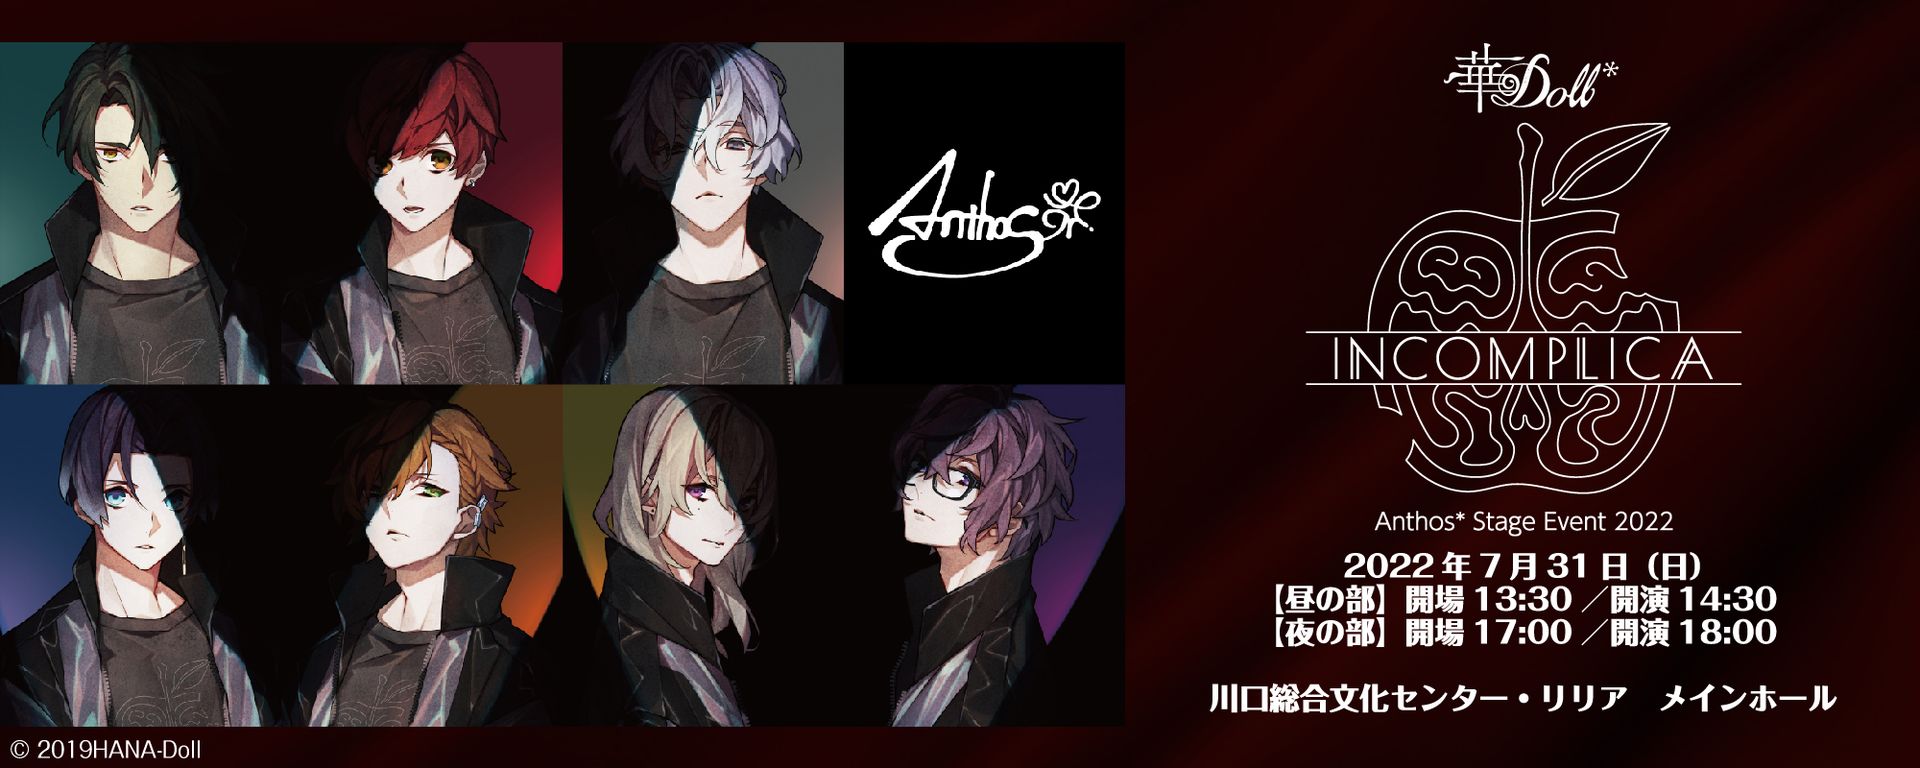 [Streaming+] 華Doll * -INCOMPLICA- Anthos* Stage Event 2022